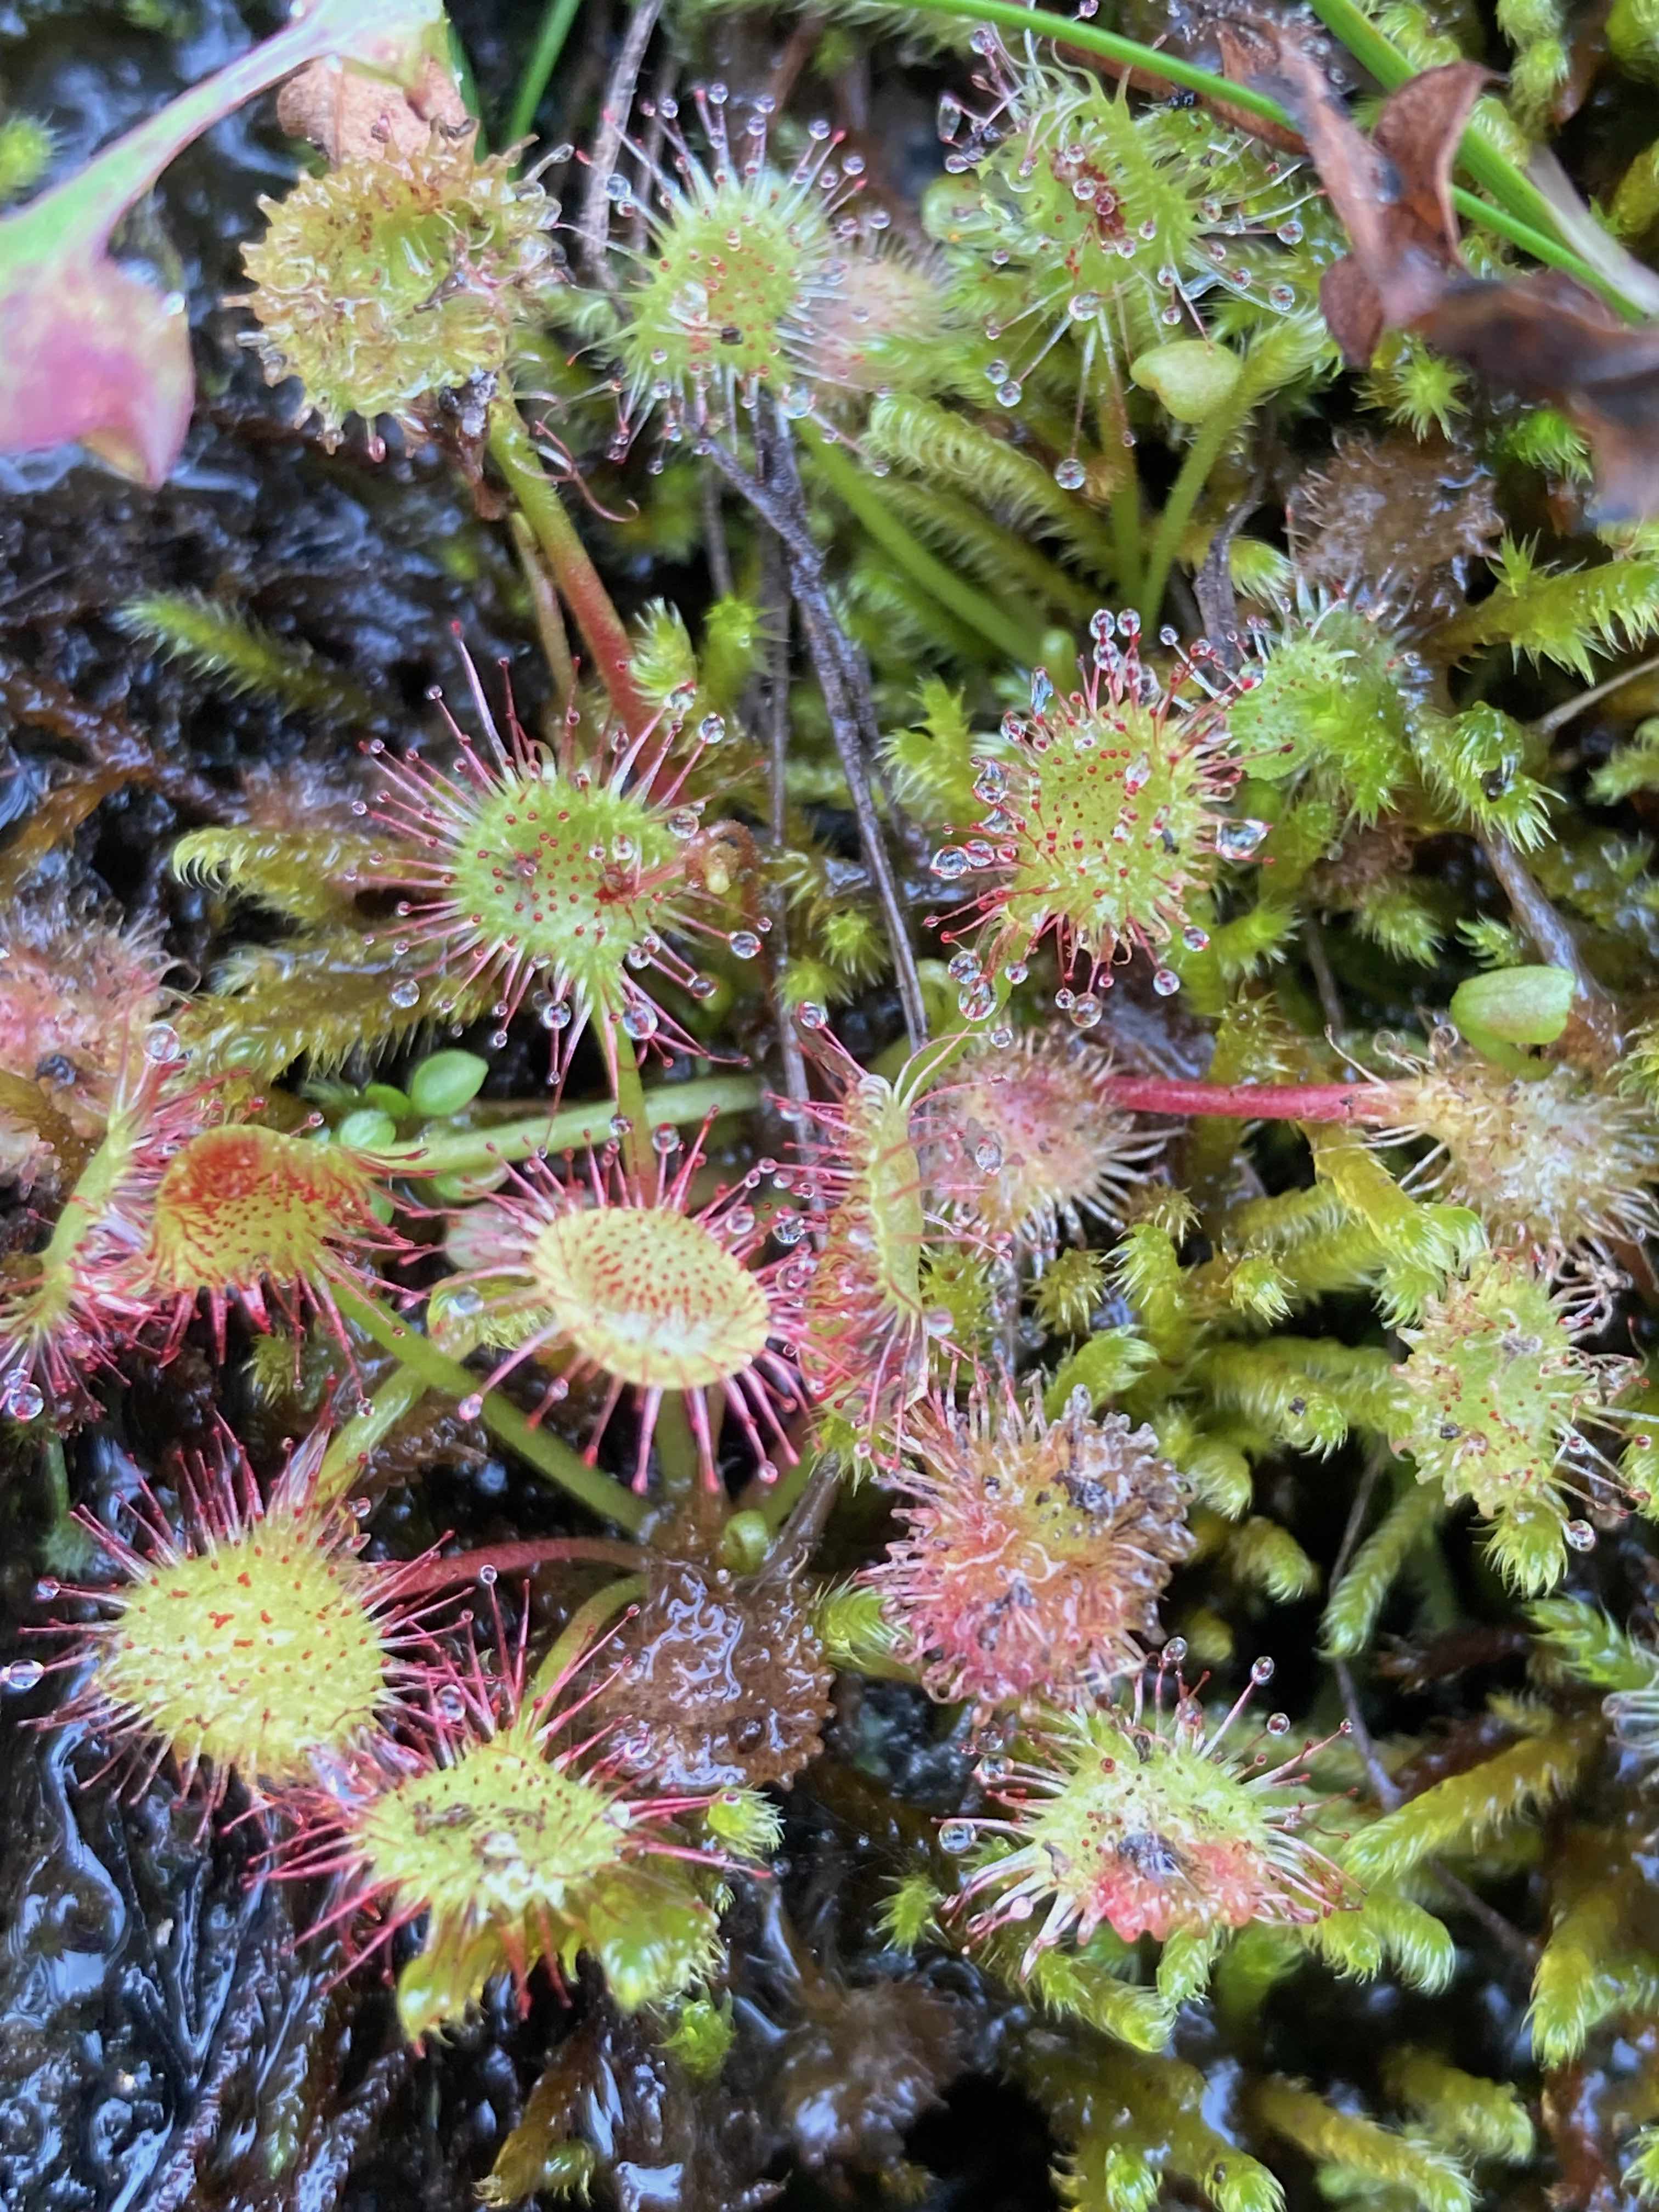 The Scientific Name is Drosera rotundifolia. You will likely hear them called Roundleaf Sundew. This picture shows the  The slender petiole ends abruptly with a wide, glandular blade. of Drosera rotundifolia